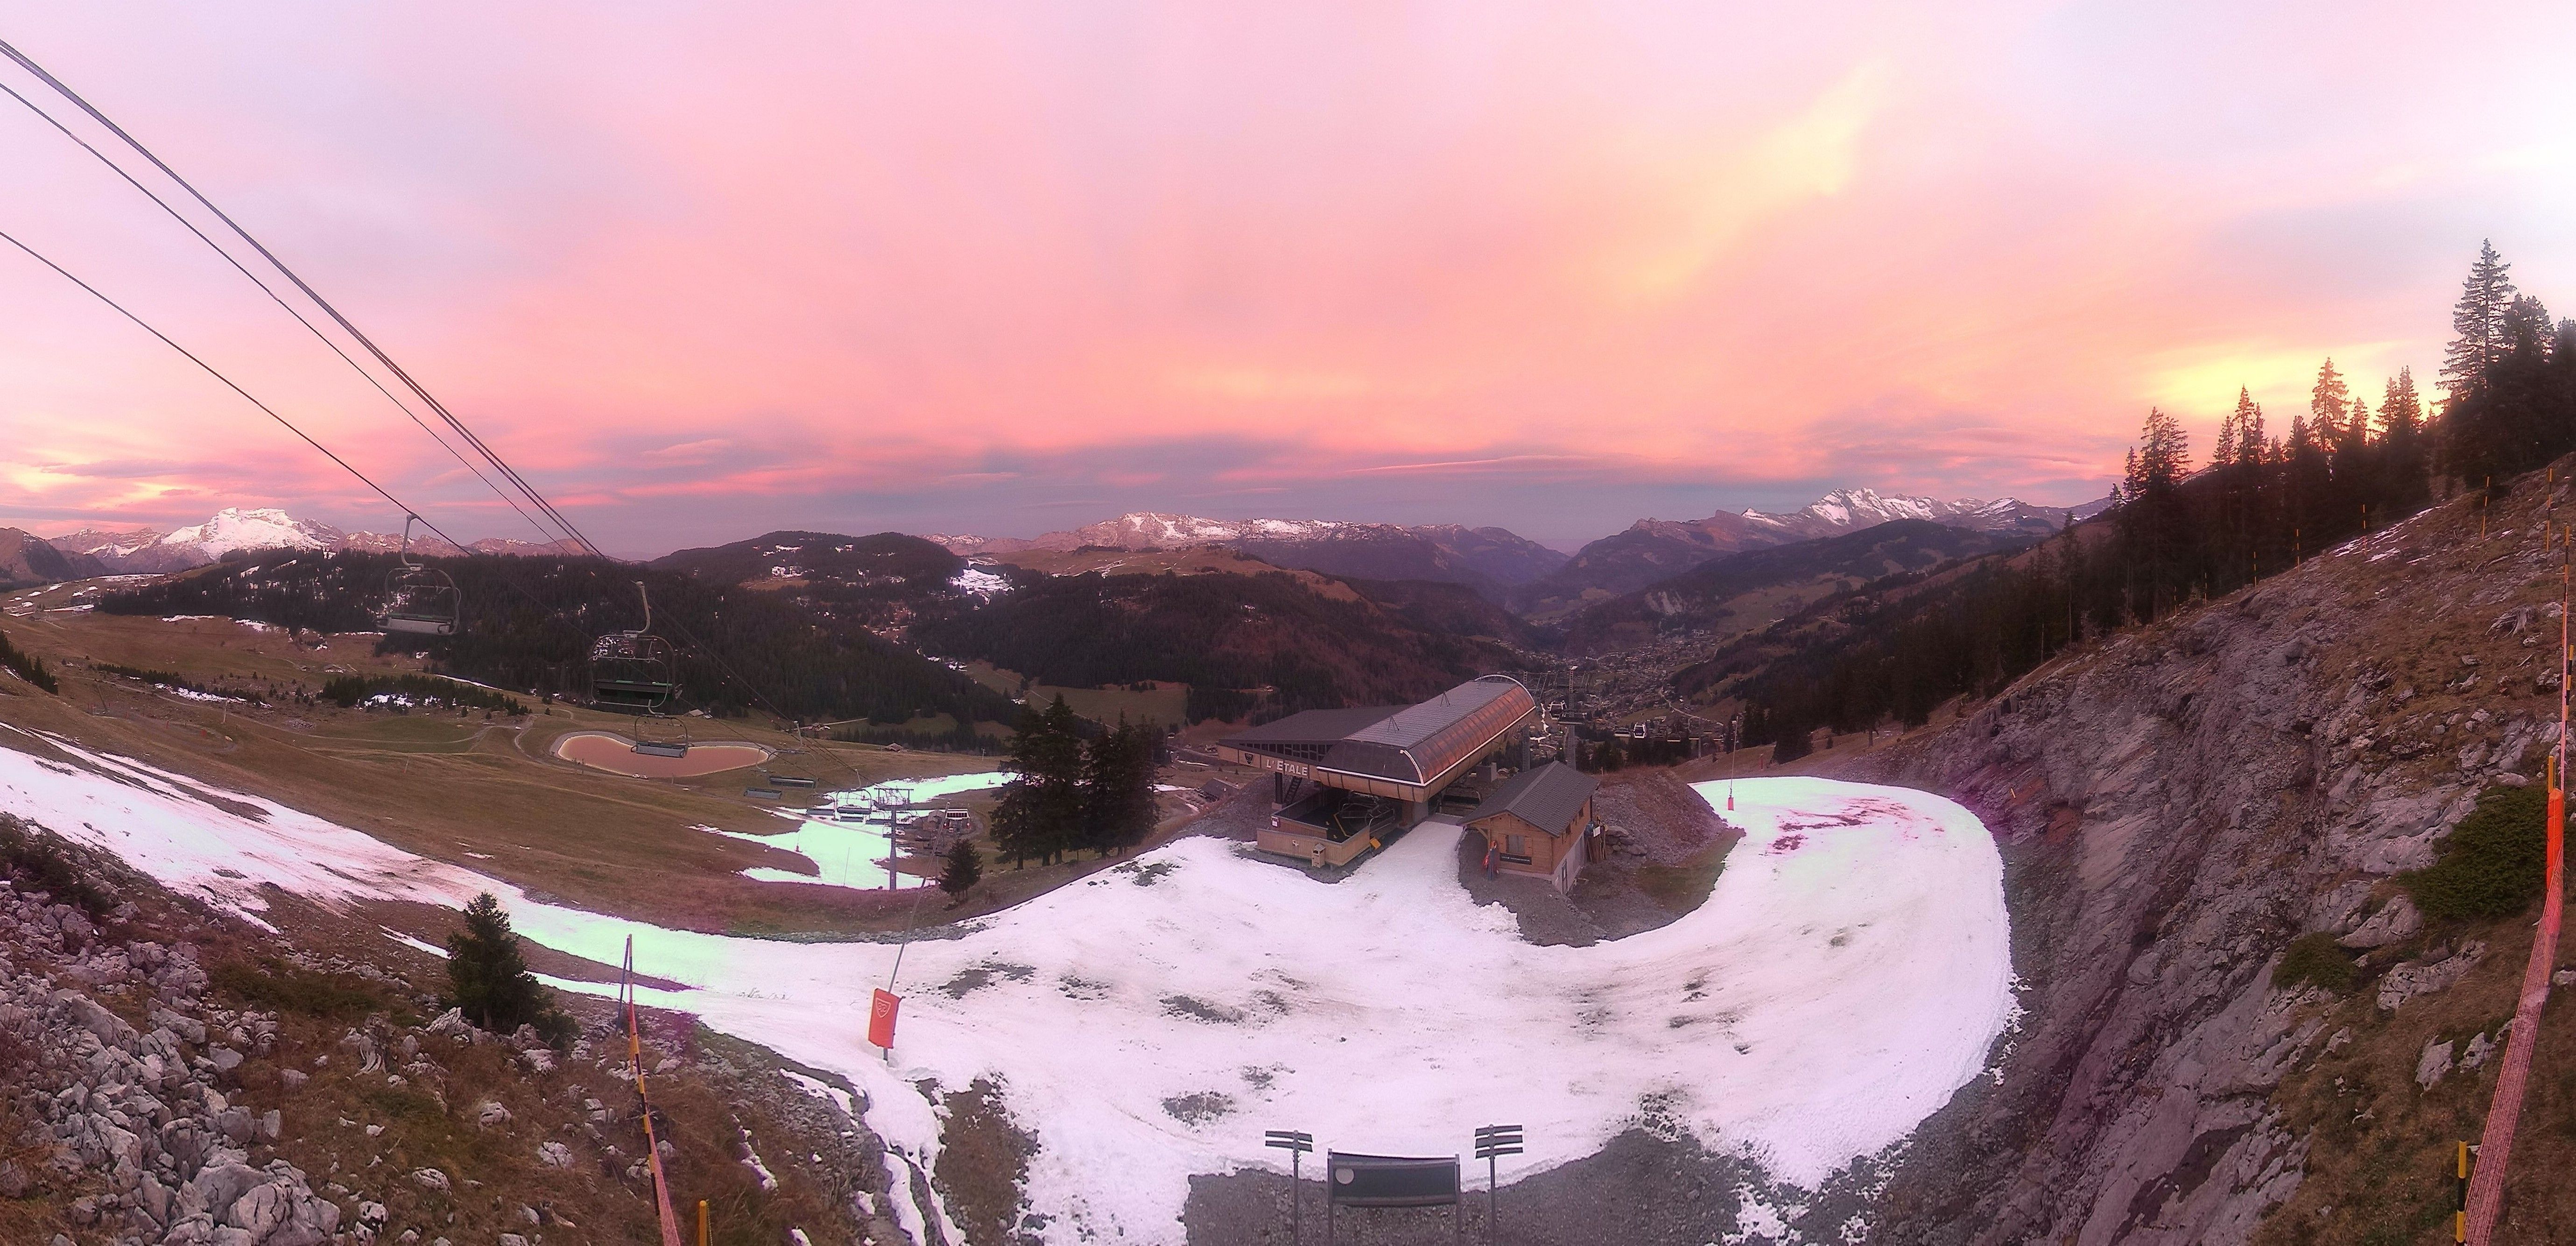 Also in La Clusaz we see almost no snow in the lower part of the skiing area